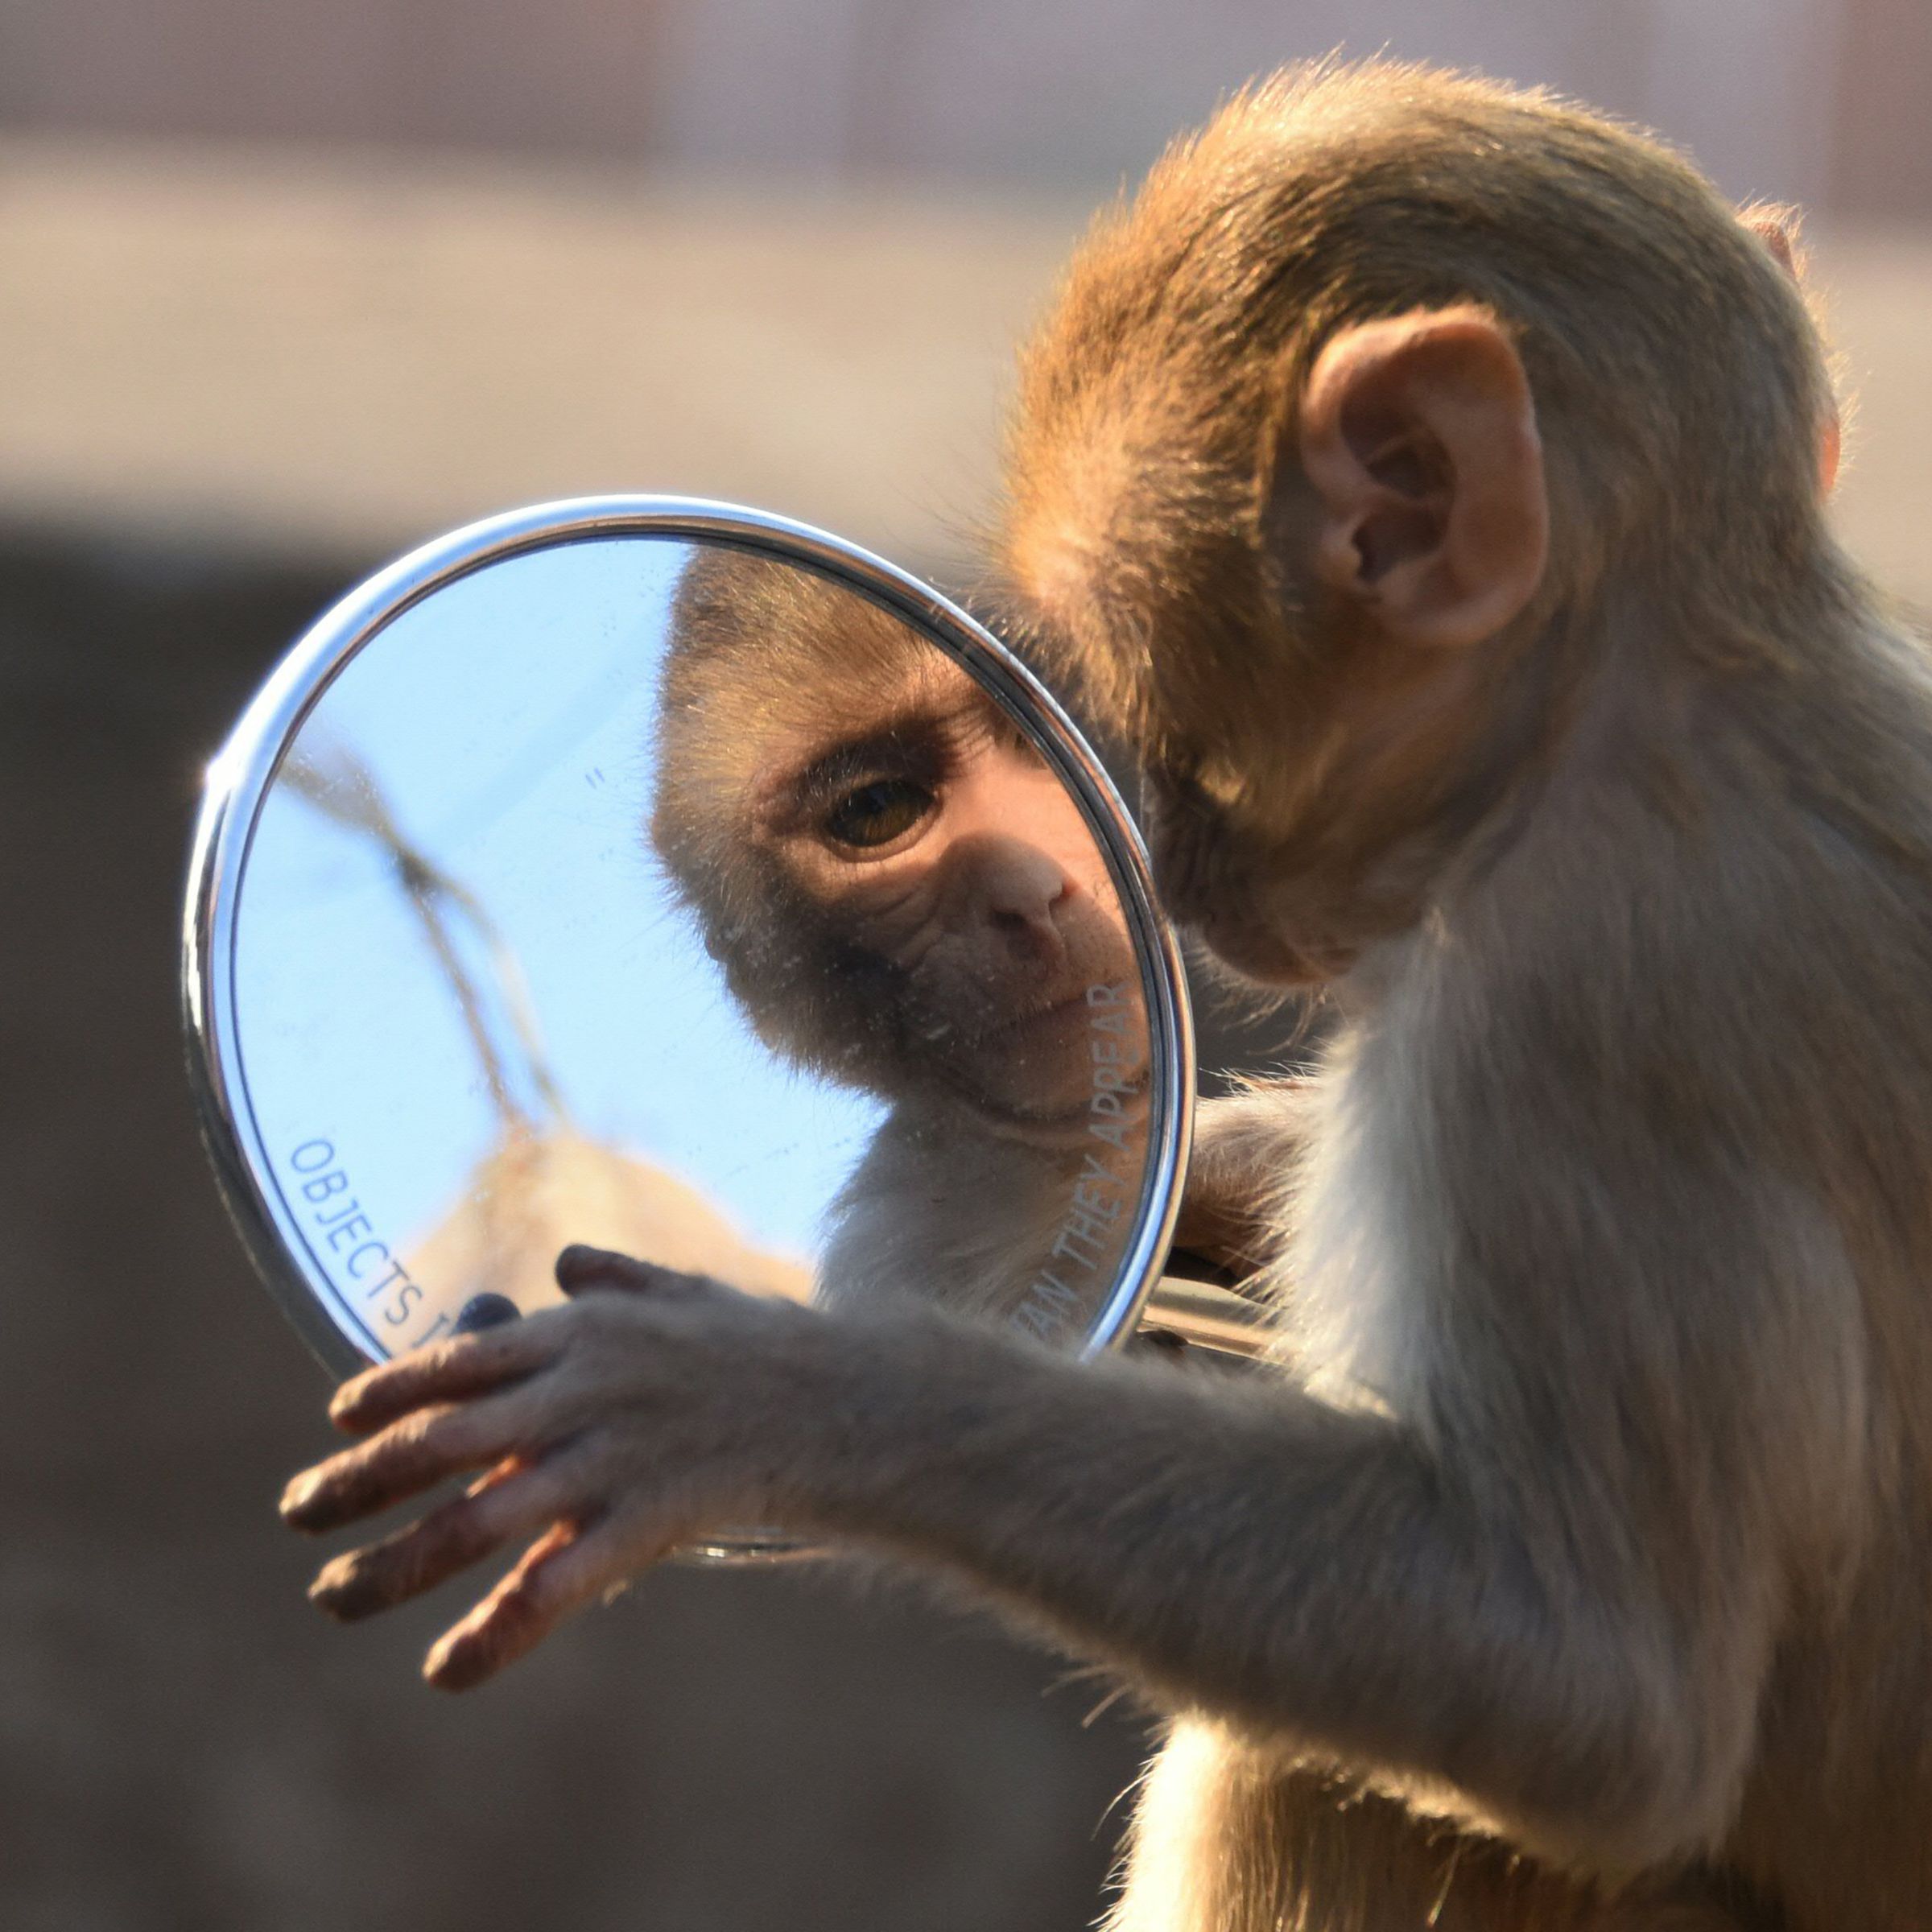 A photograph of a monkey inspecting its reflection in the mirror.